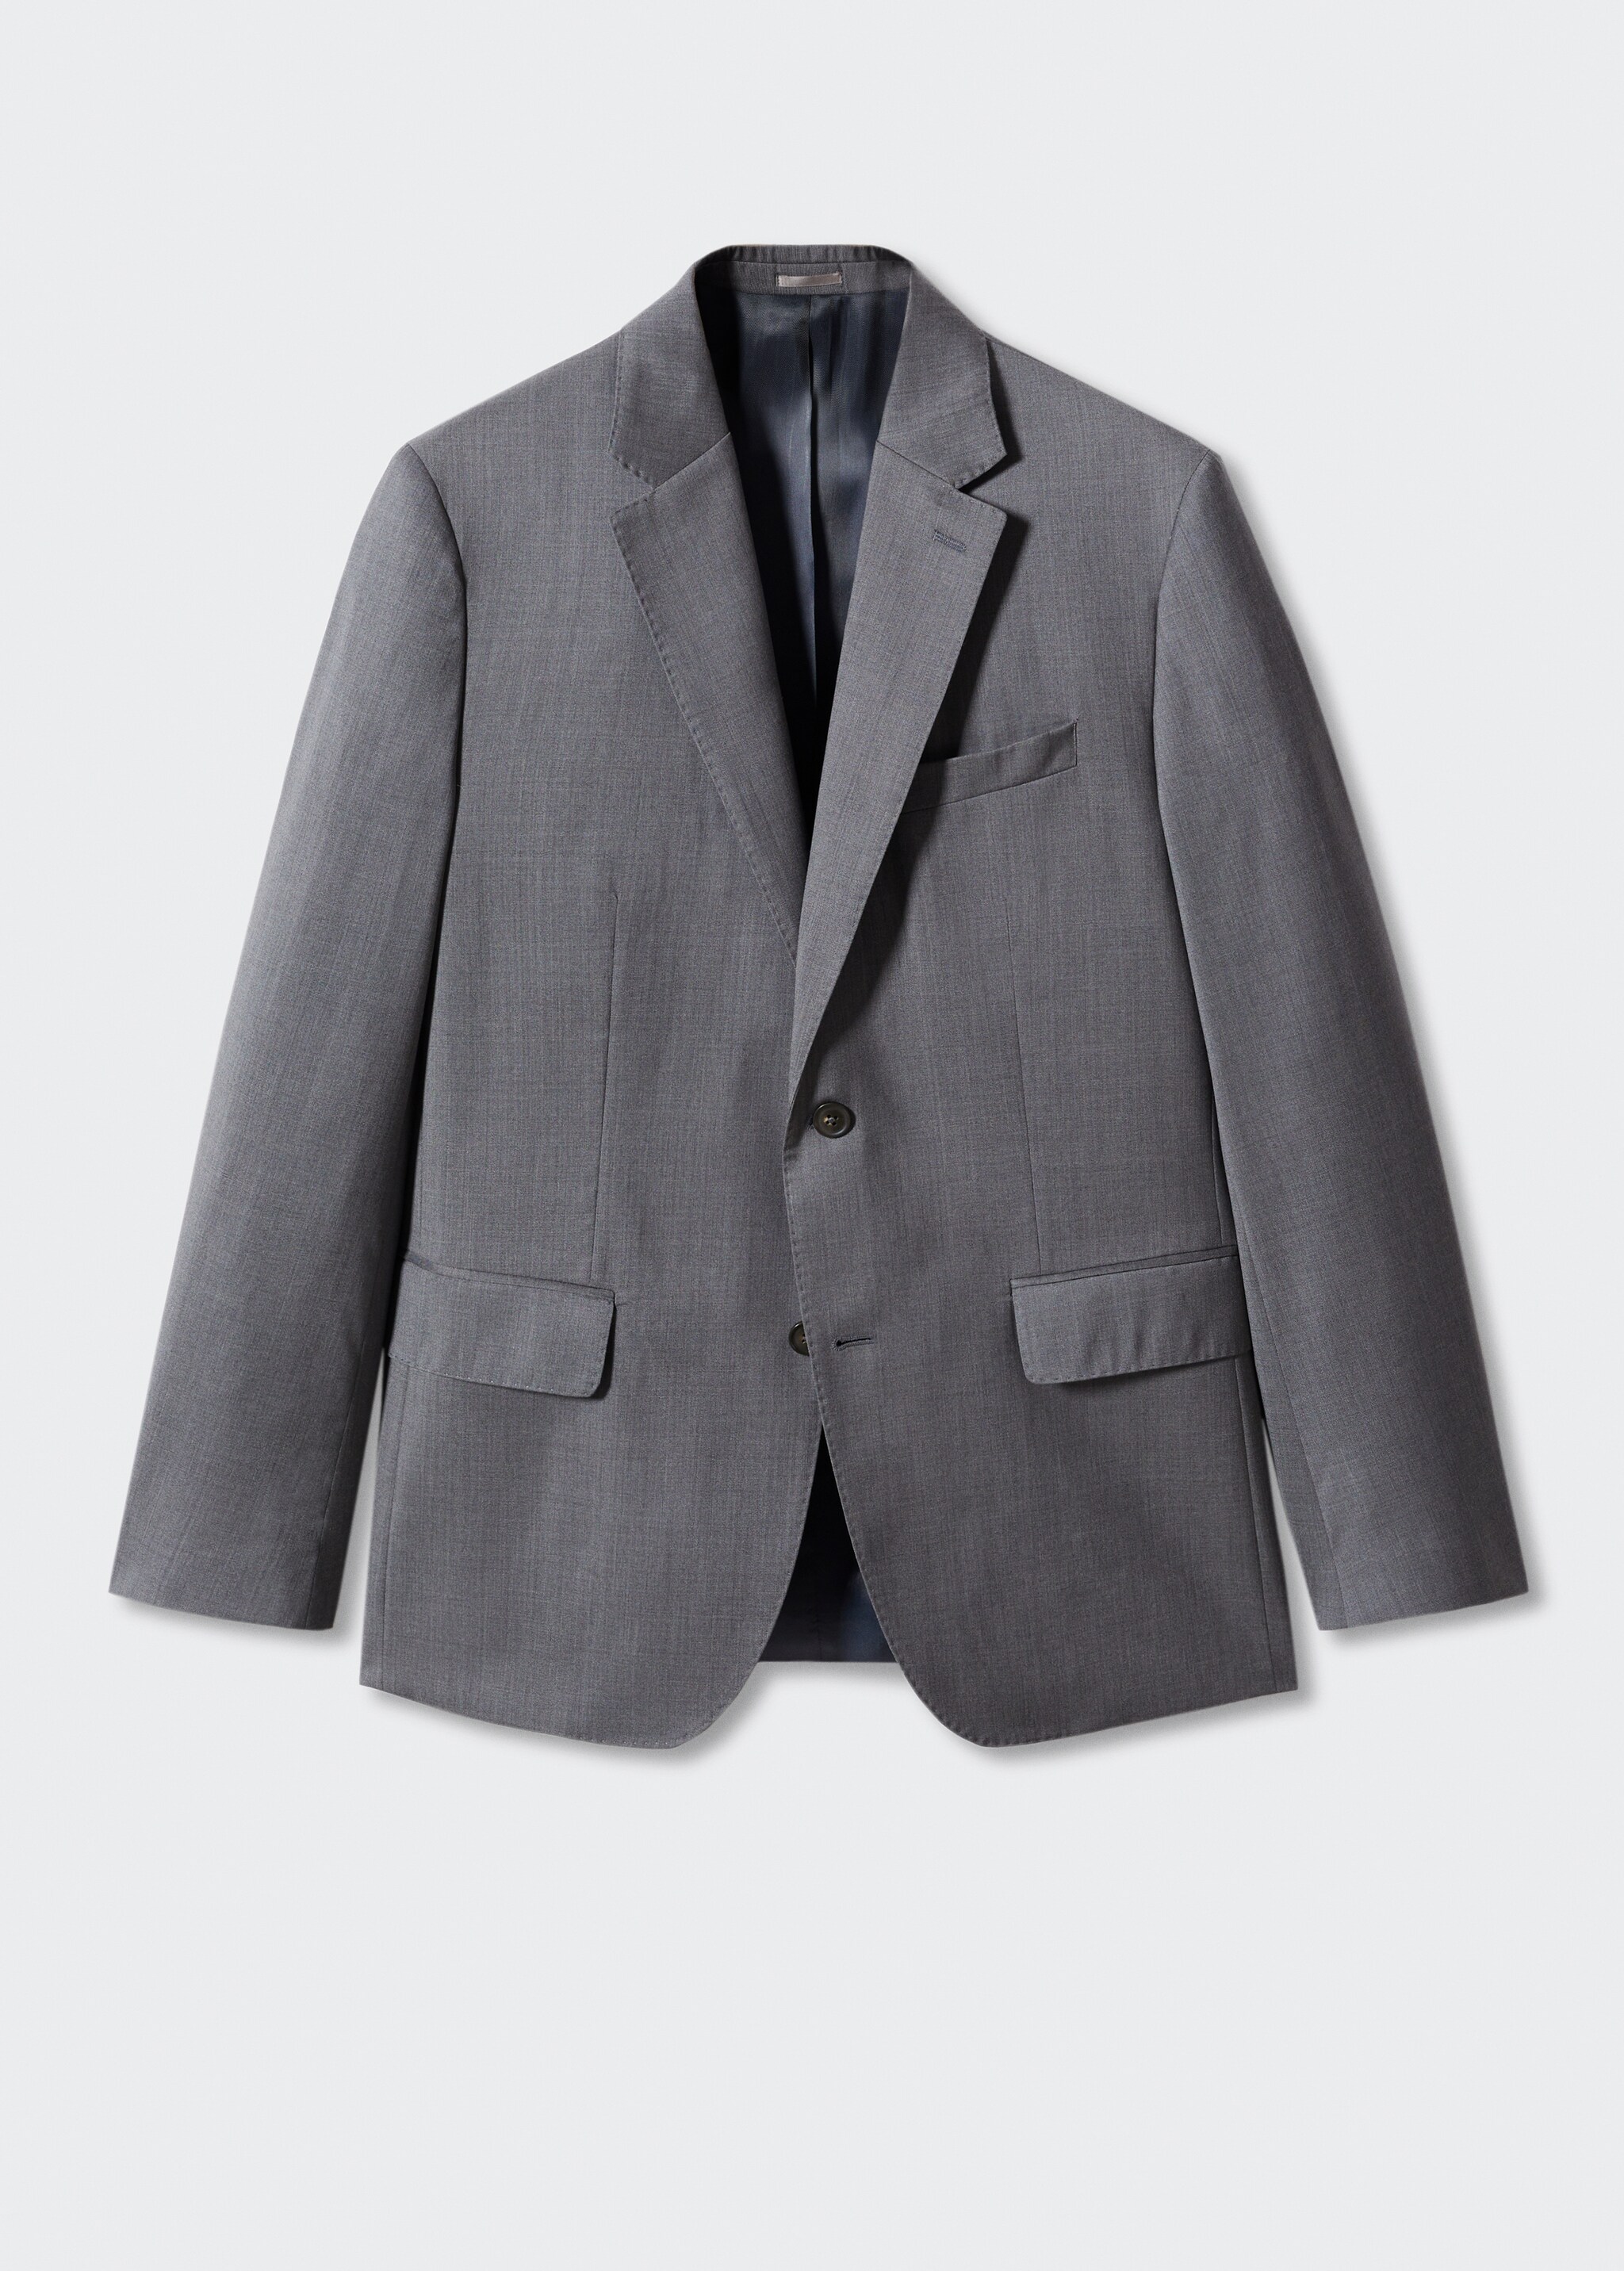 100% virgin wool suit jacket - Article without model